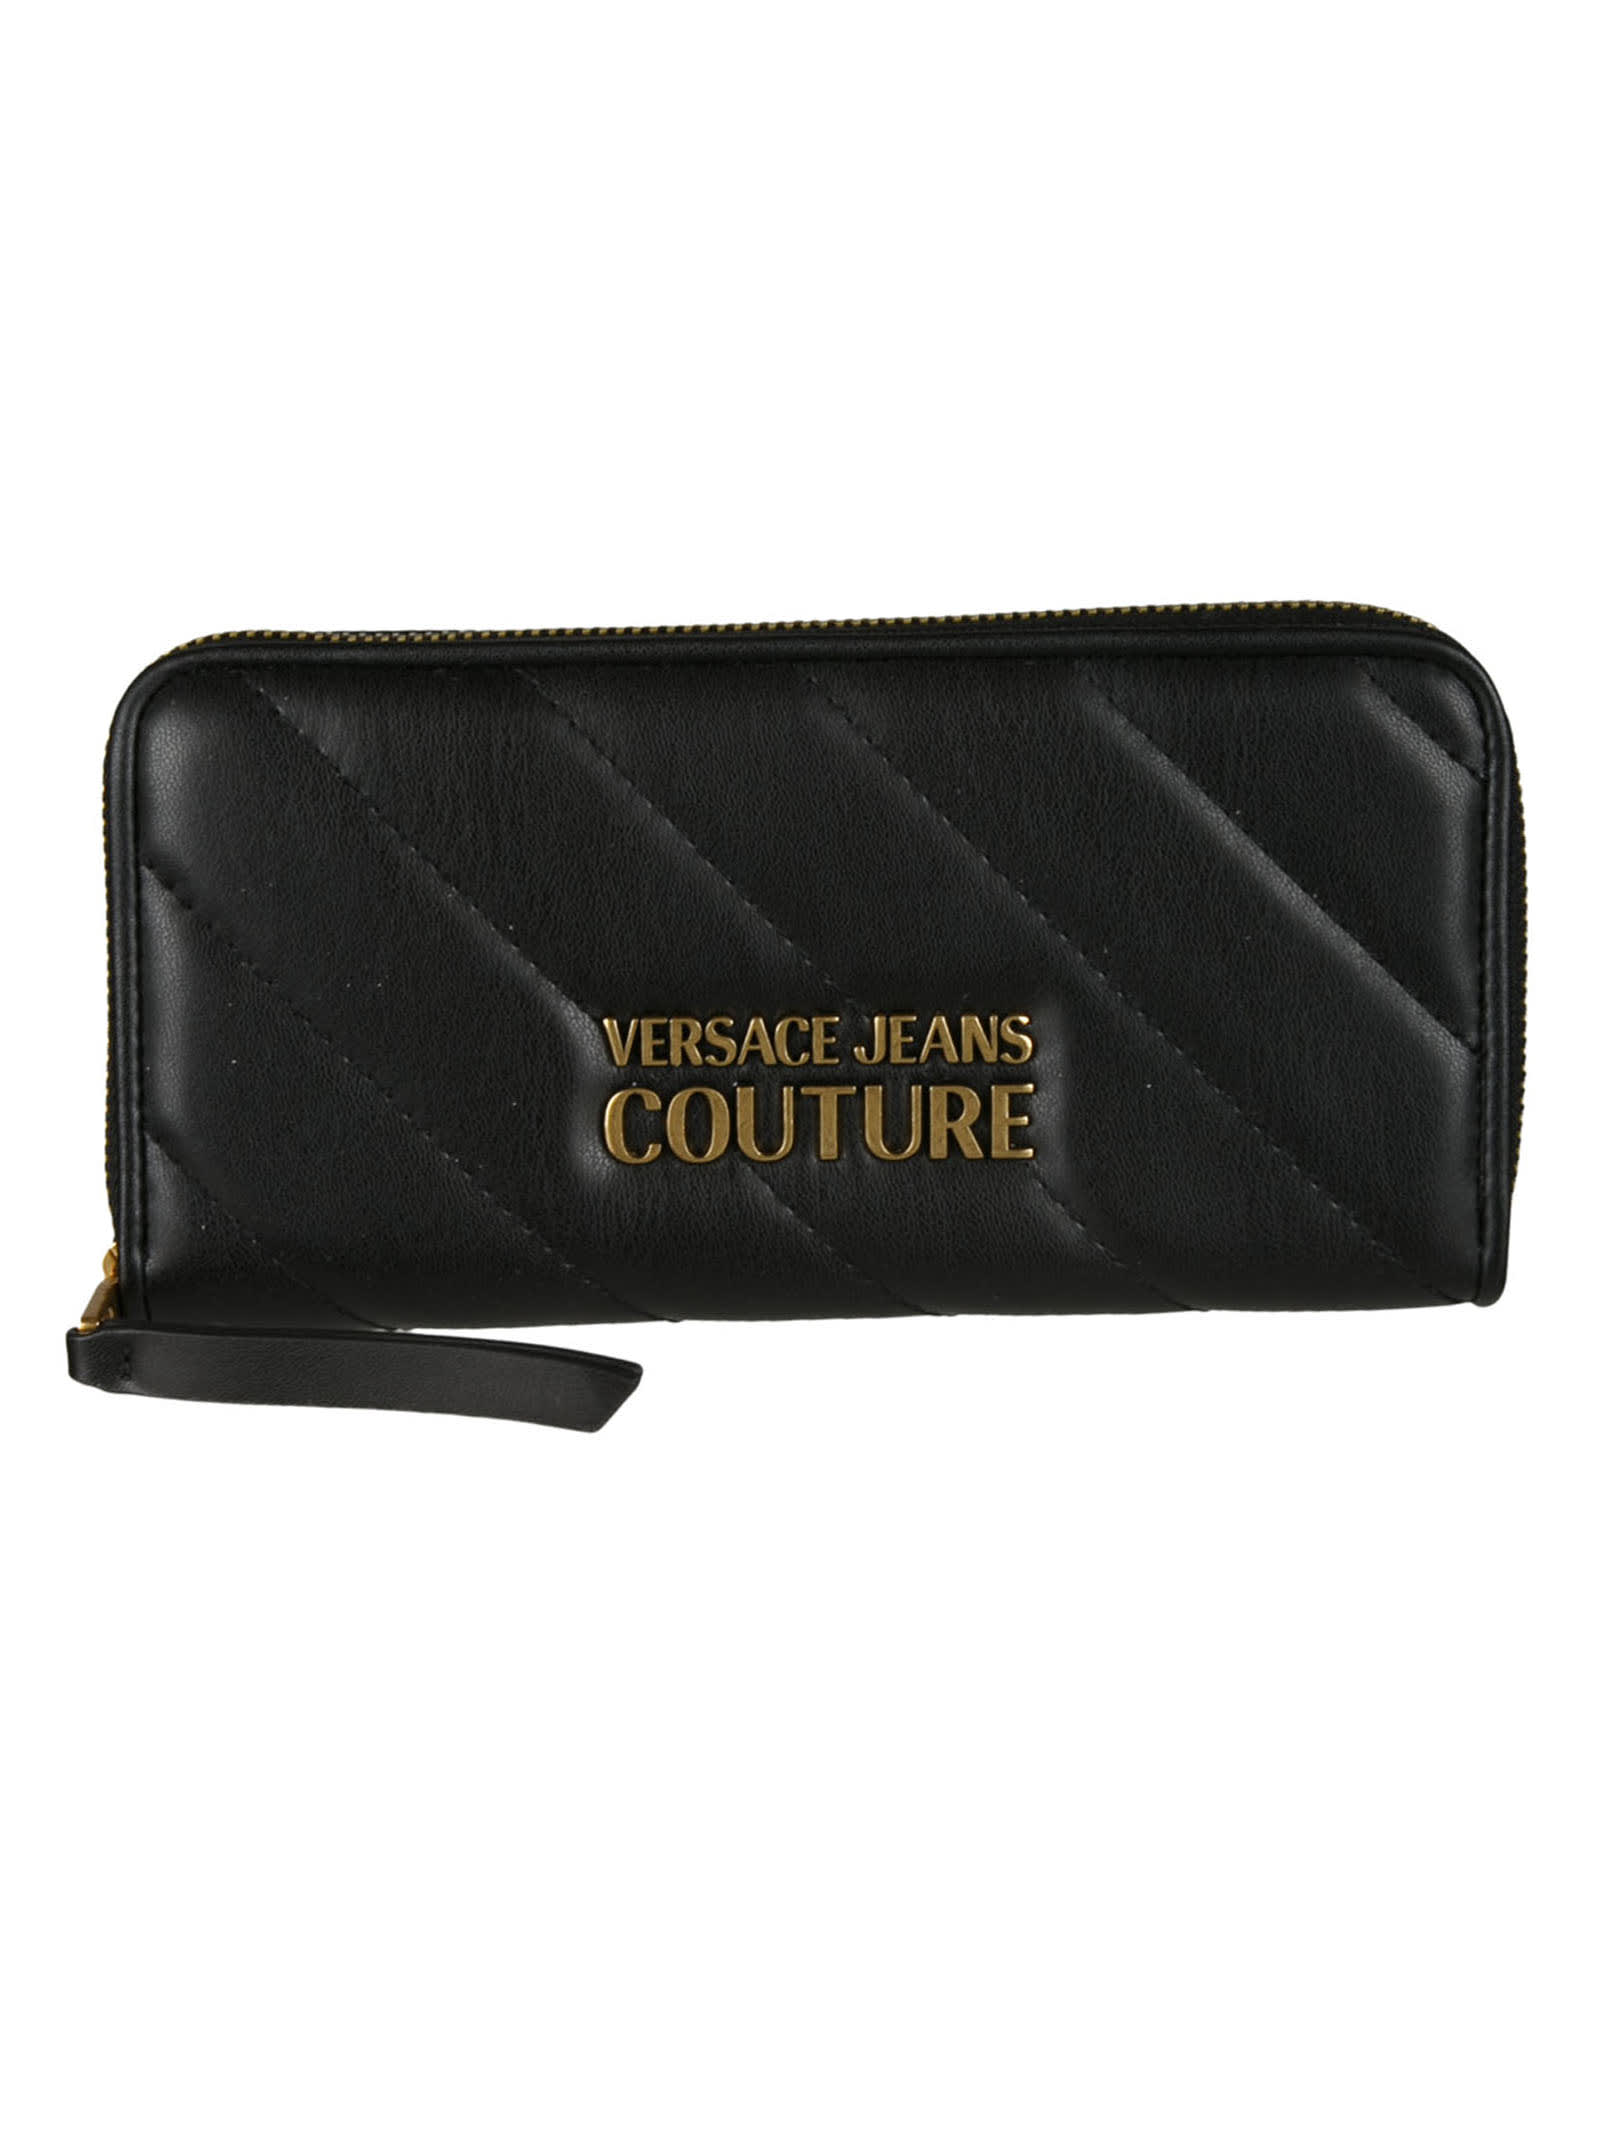 Versace Jeans Couture Thelma Soft Zip-around Wallet